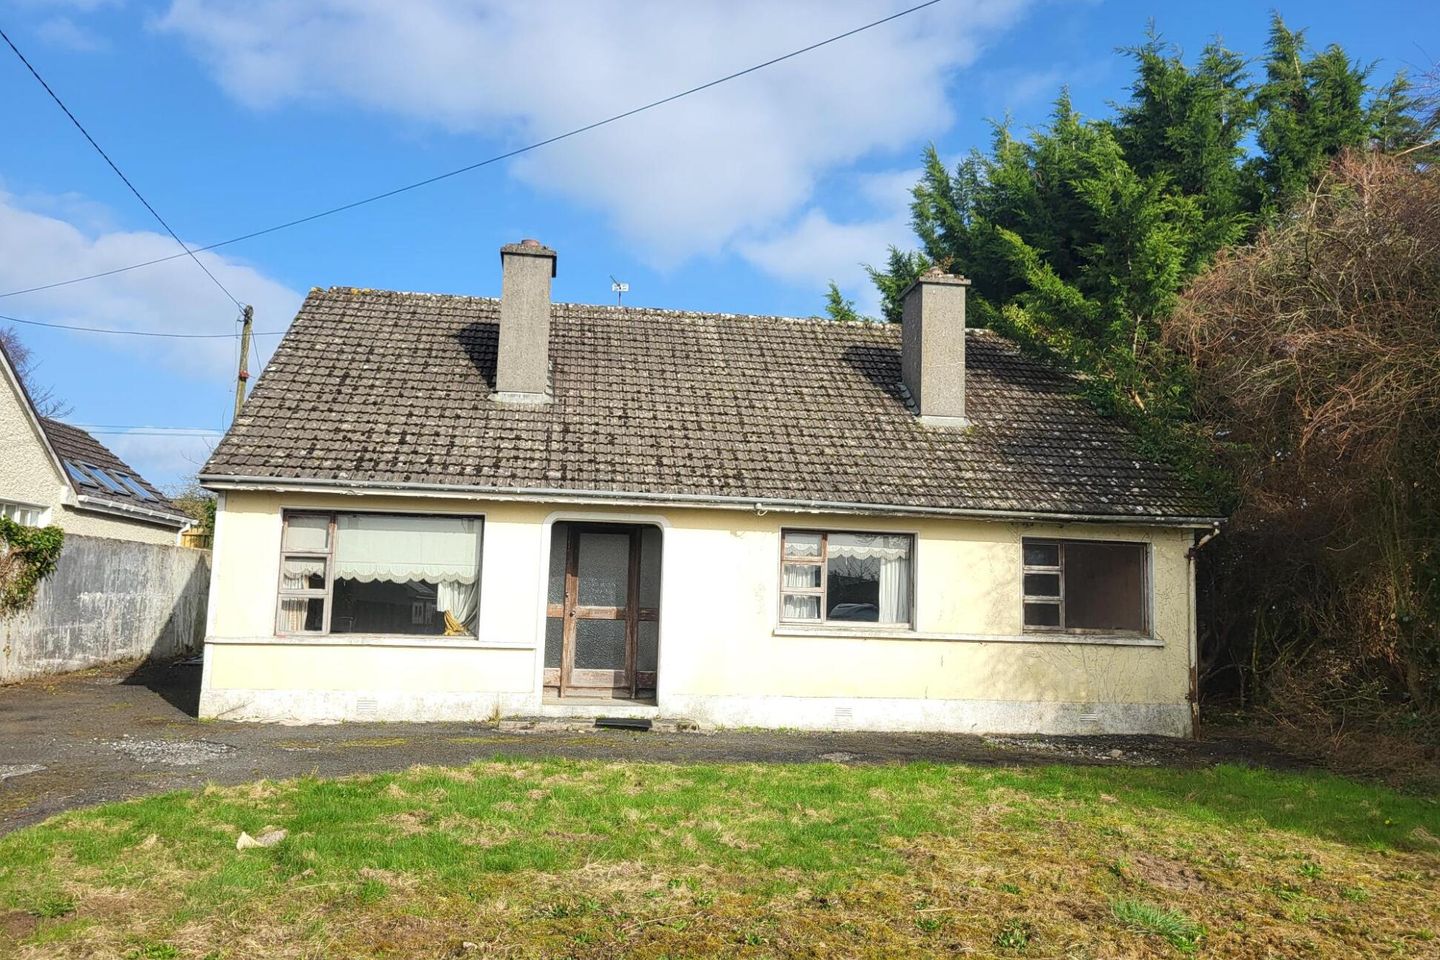 Sragh Road, Tullamore, Co Offaly, R35FT65